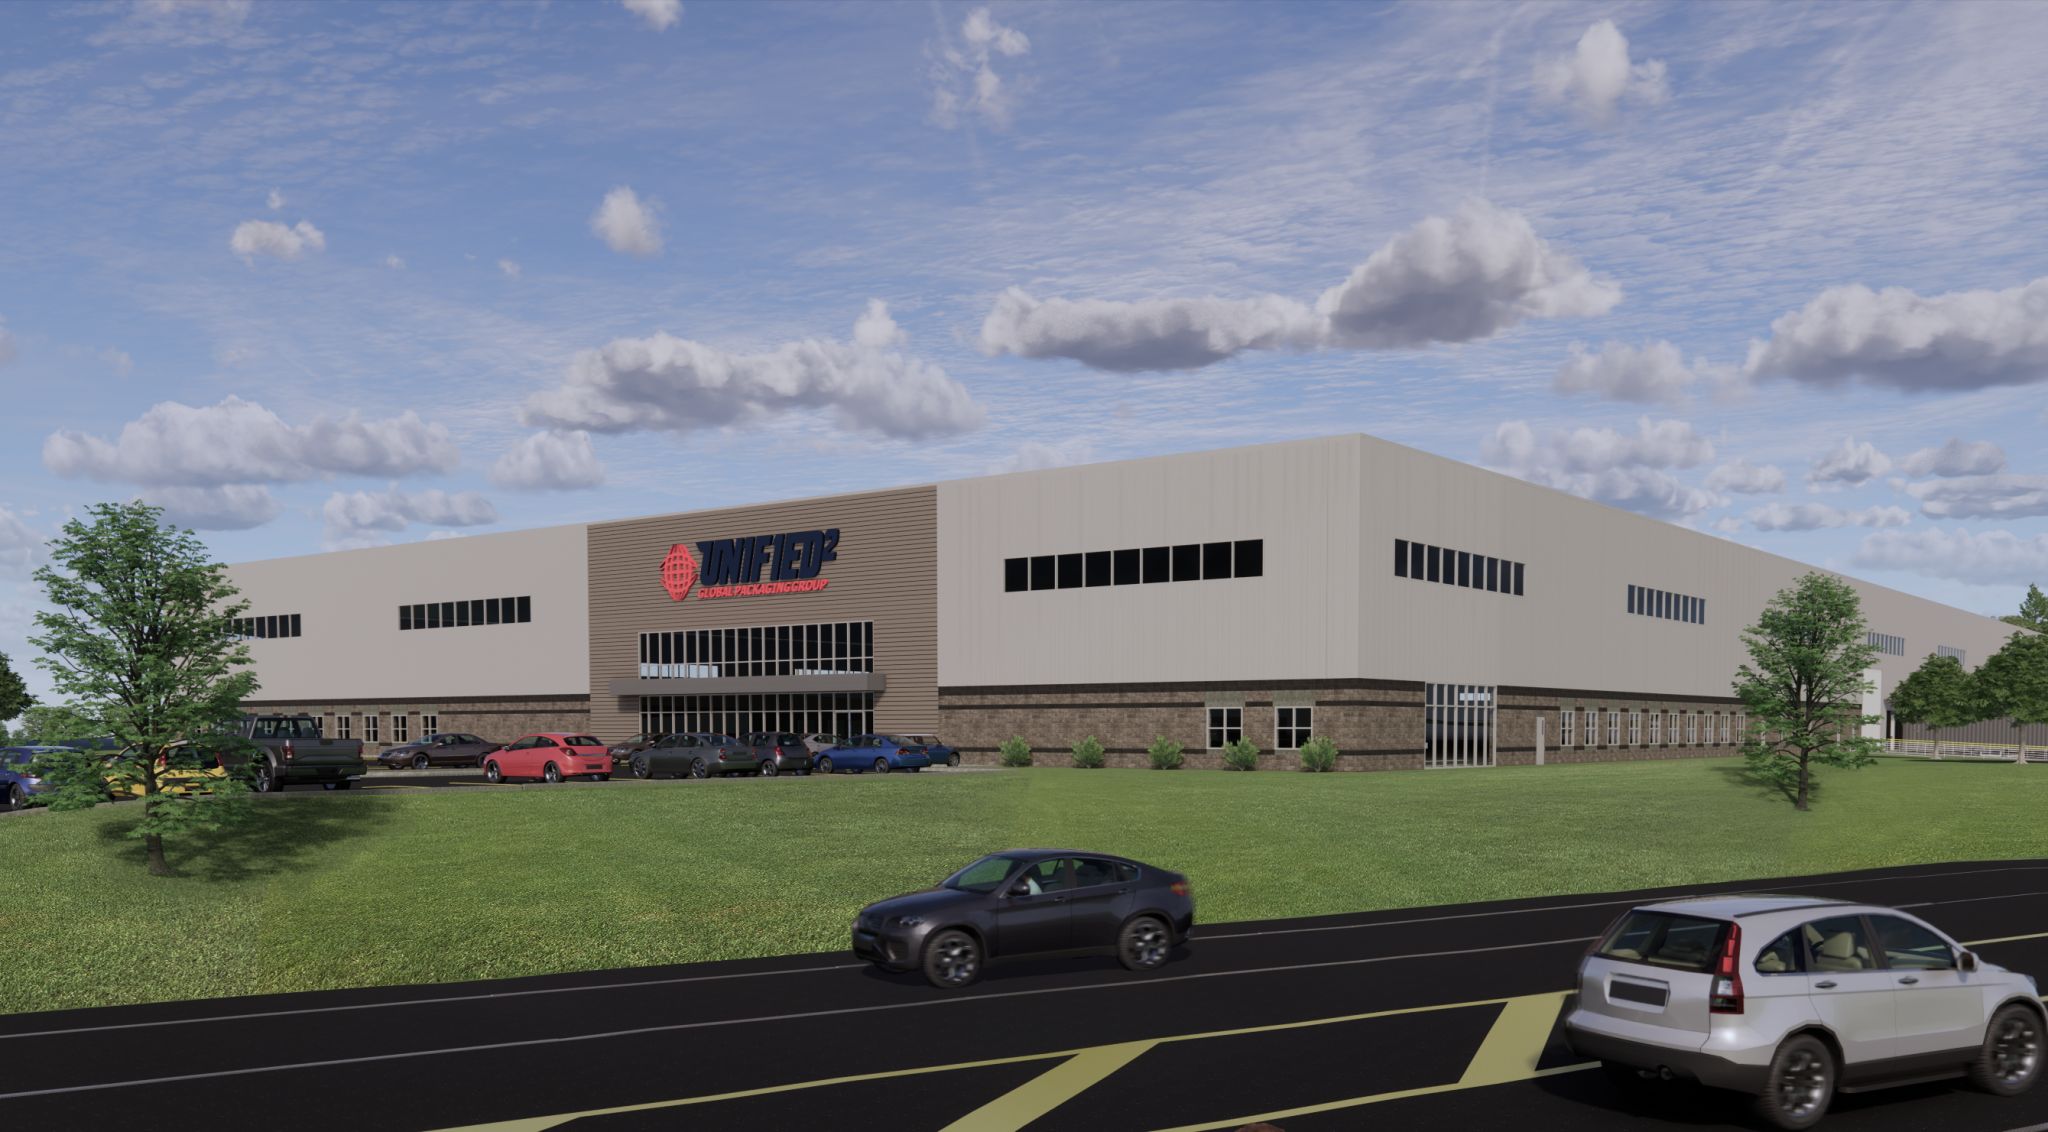 Two Blackstone Valley warehouses, totalling 2M sq. ft. begin construction, amid Route 146 industrial development bonanza